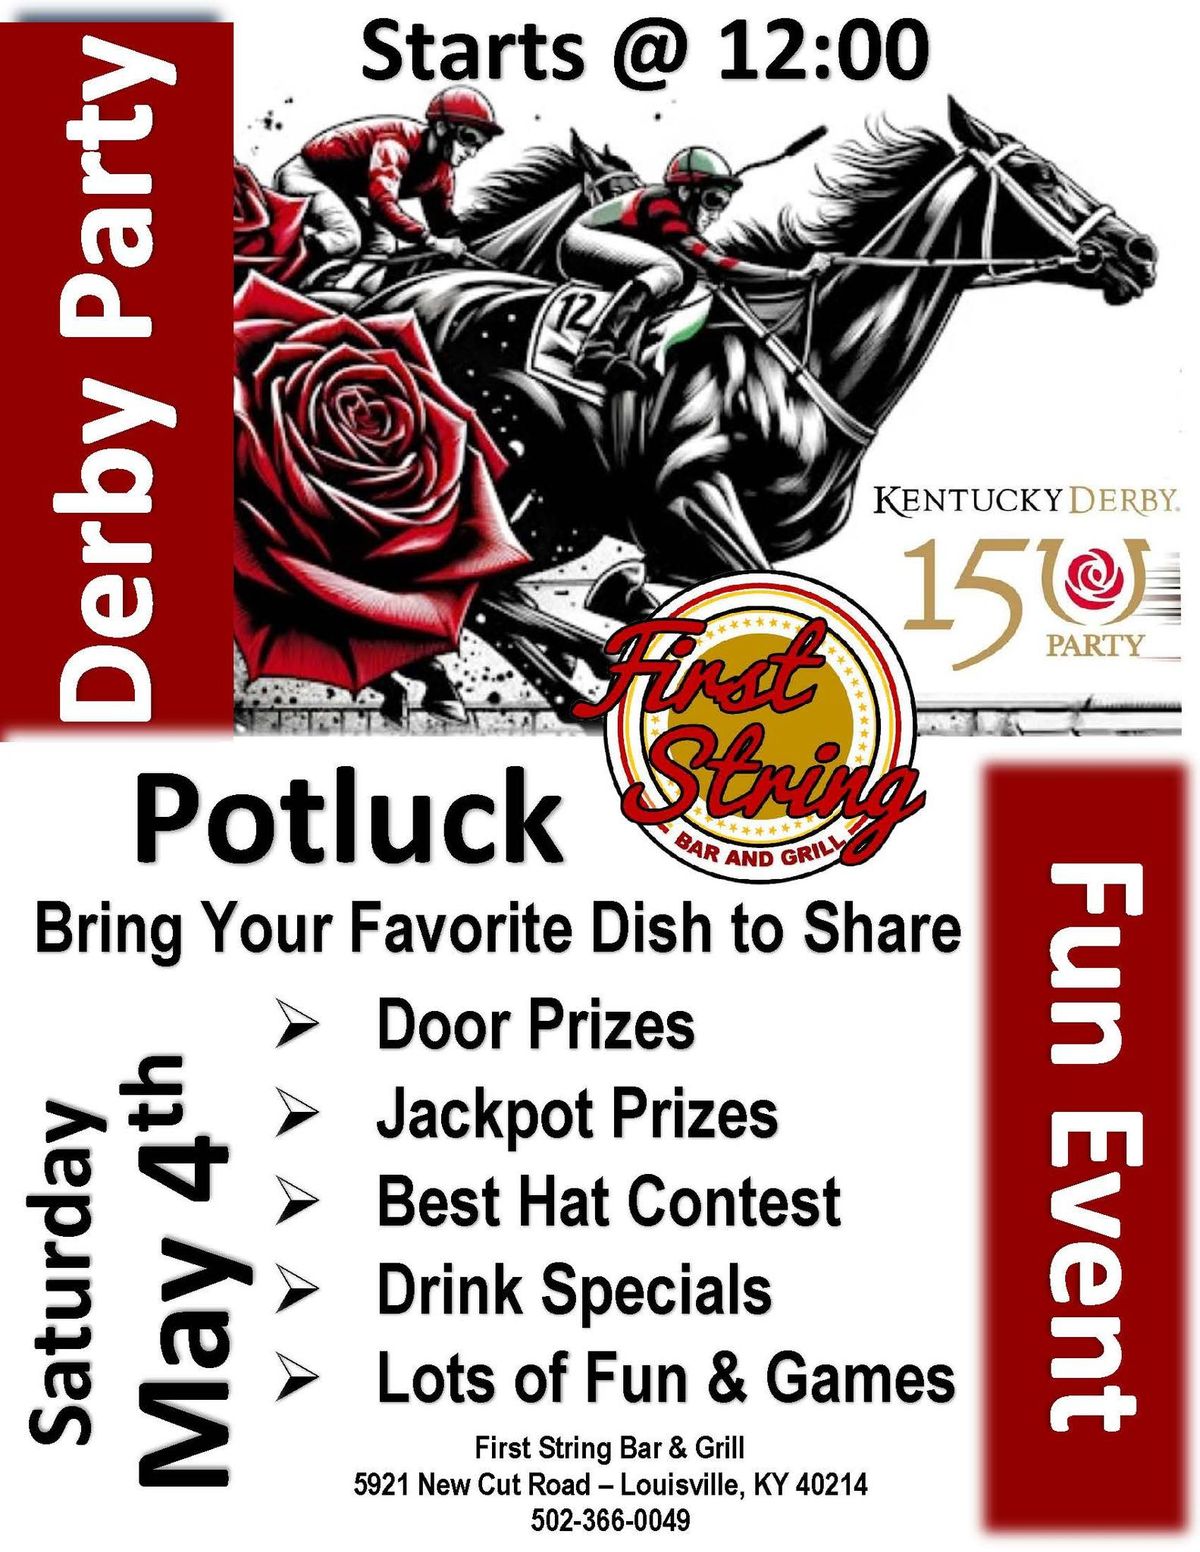 IT'S DERBY DAY AT FIRST STRING - POTLOCK DERBY WATCH PARTY